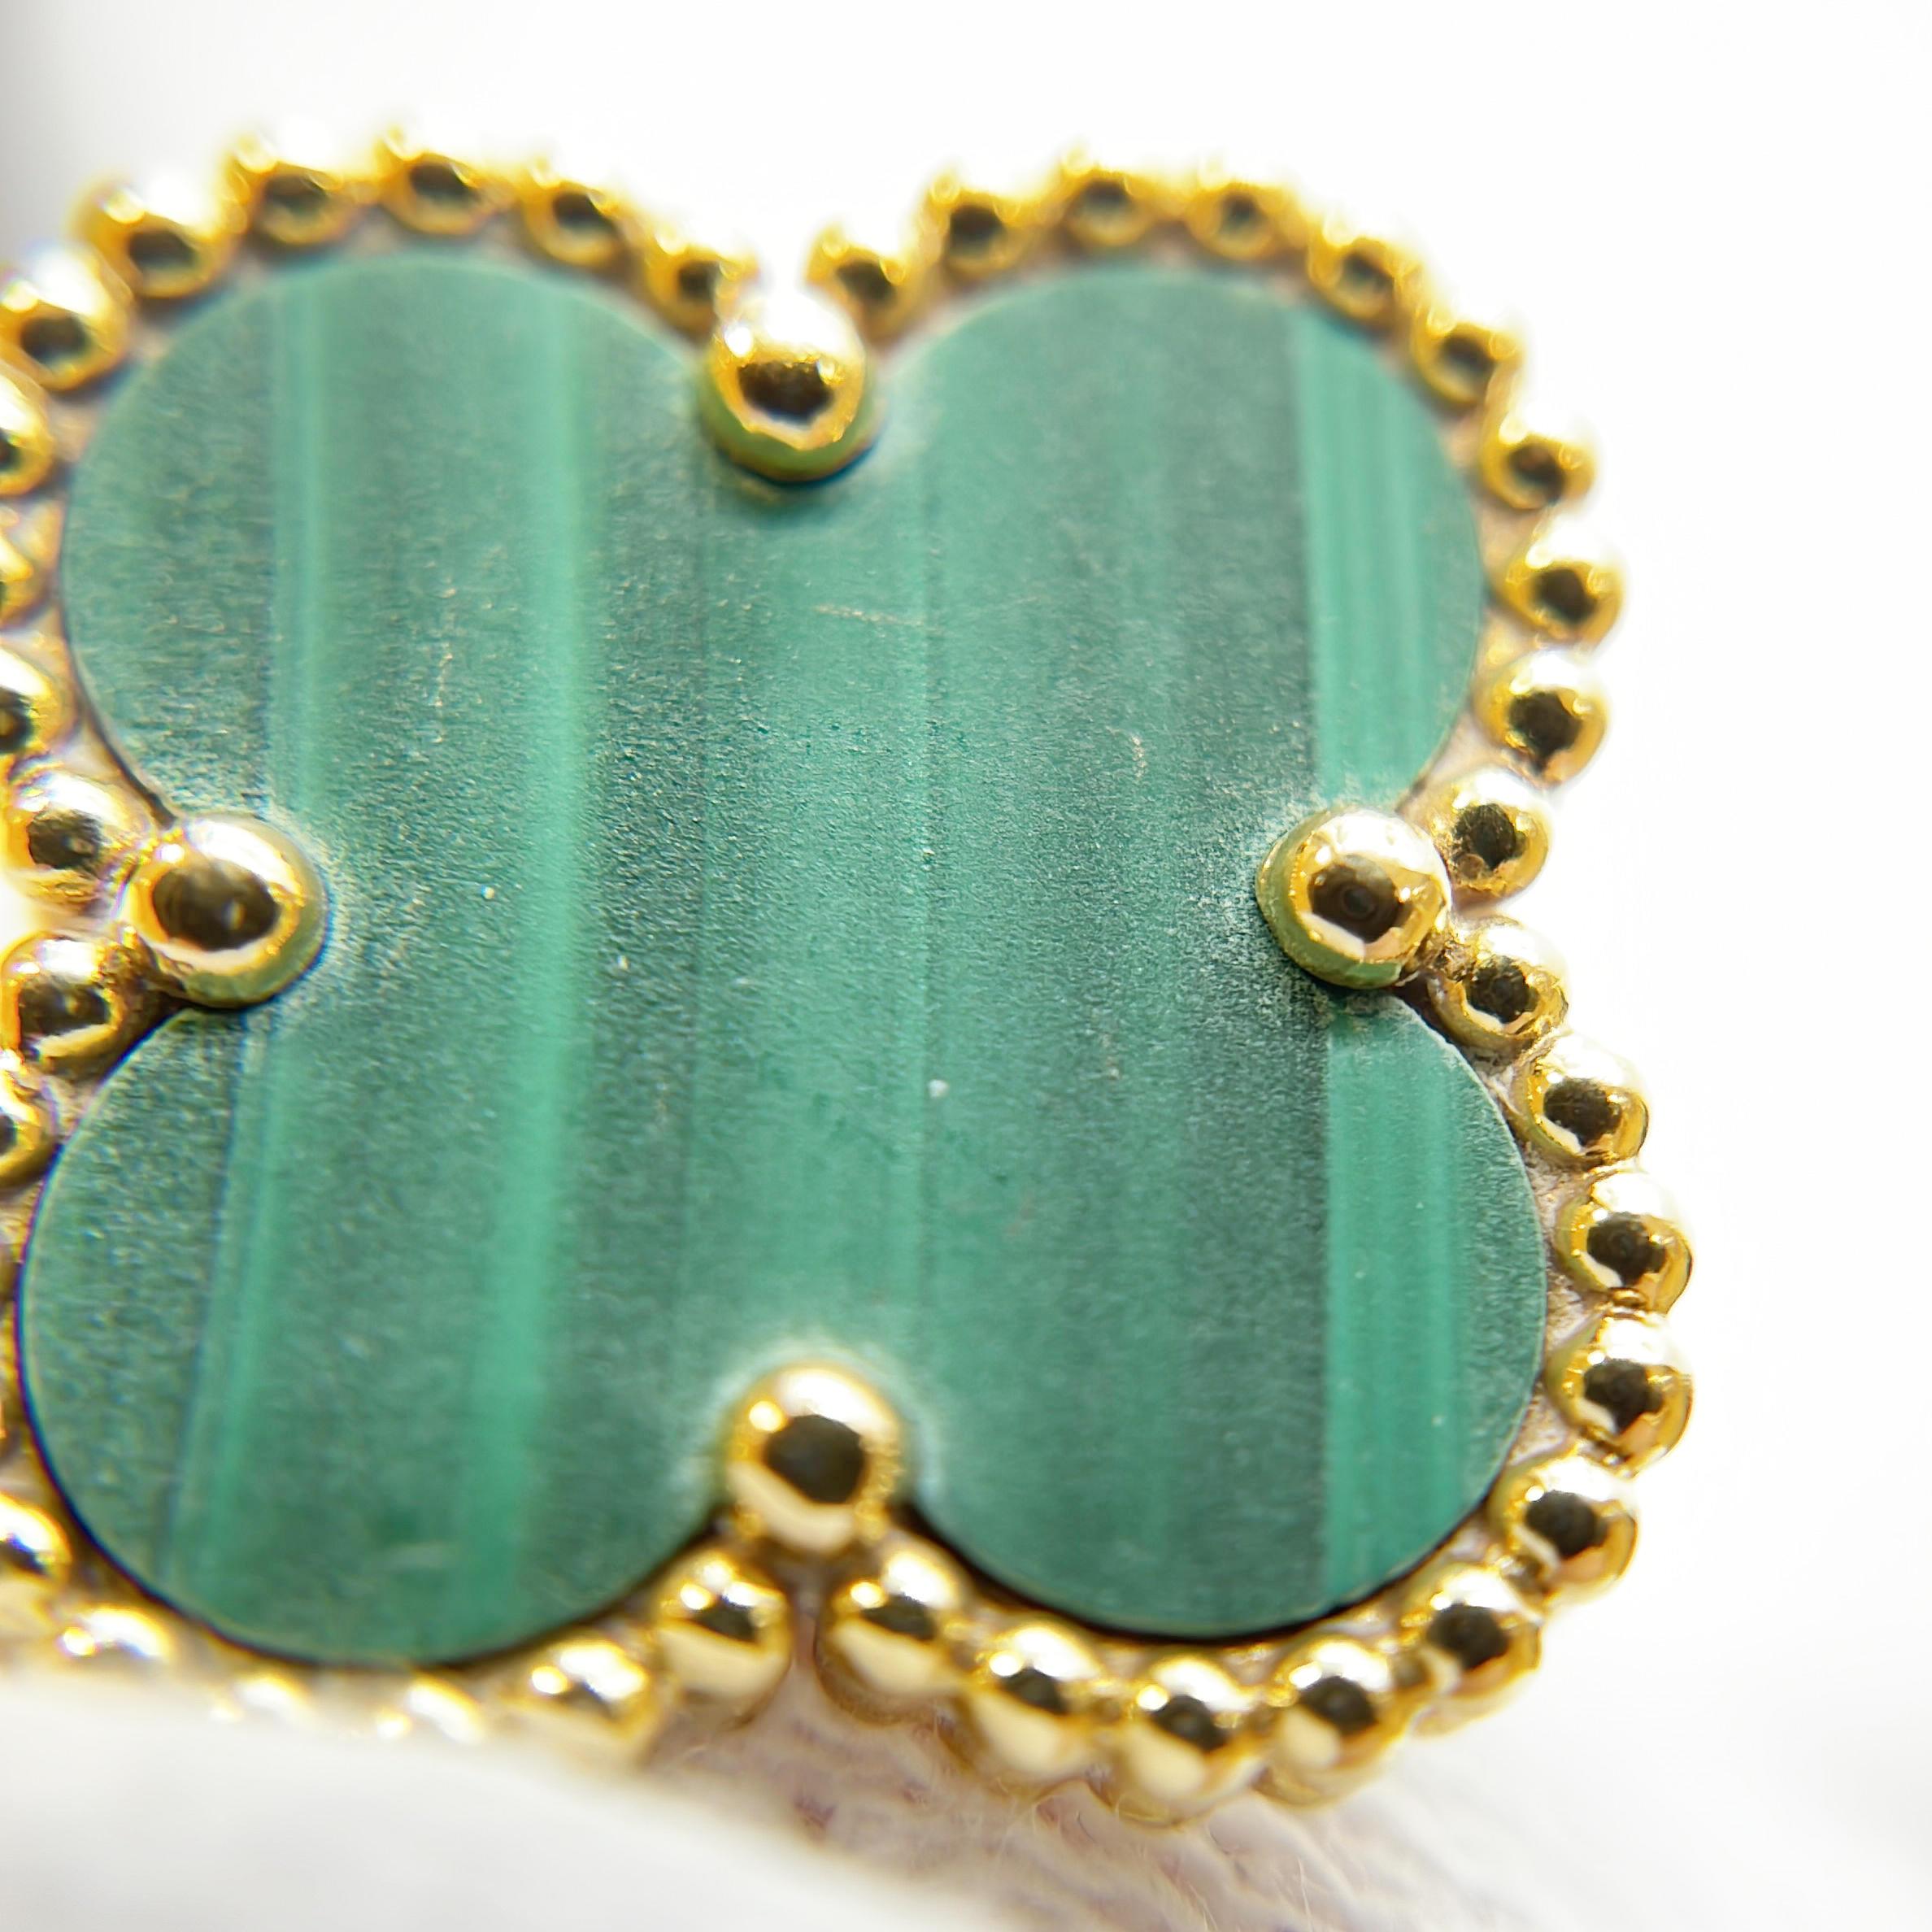 Brand : Van Cleef & Arpels 
Description:  Van Cleef & Arpels Vintage Alhambra Malachite
Metal Type: 750YG/Yellow Gold
Weight: 5.4g
Condition: Preowned; small signs of wearing
Box - Included
Papers - Included